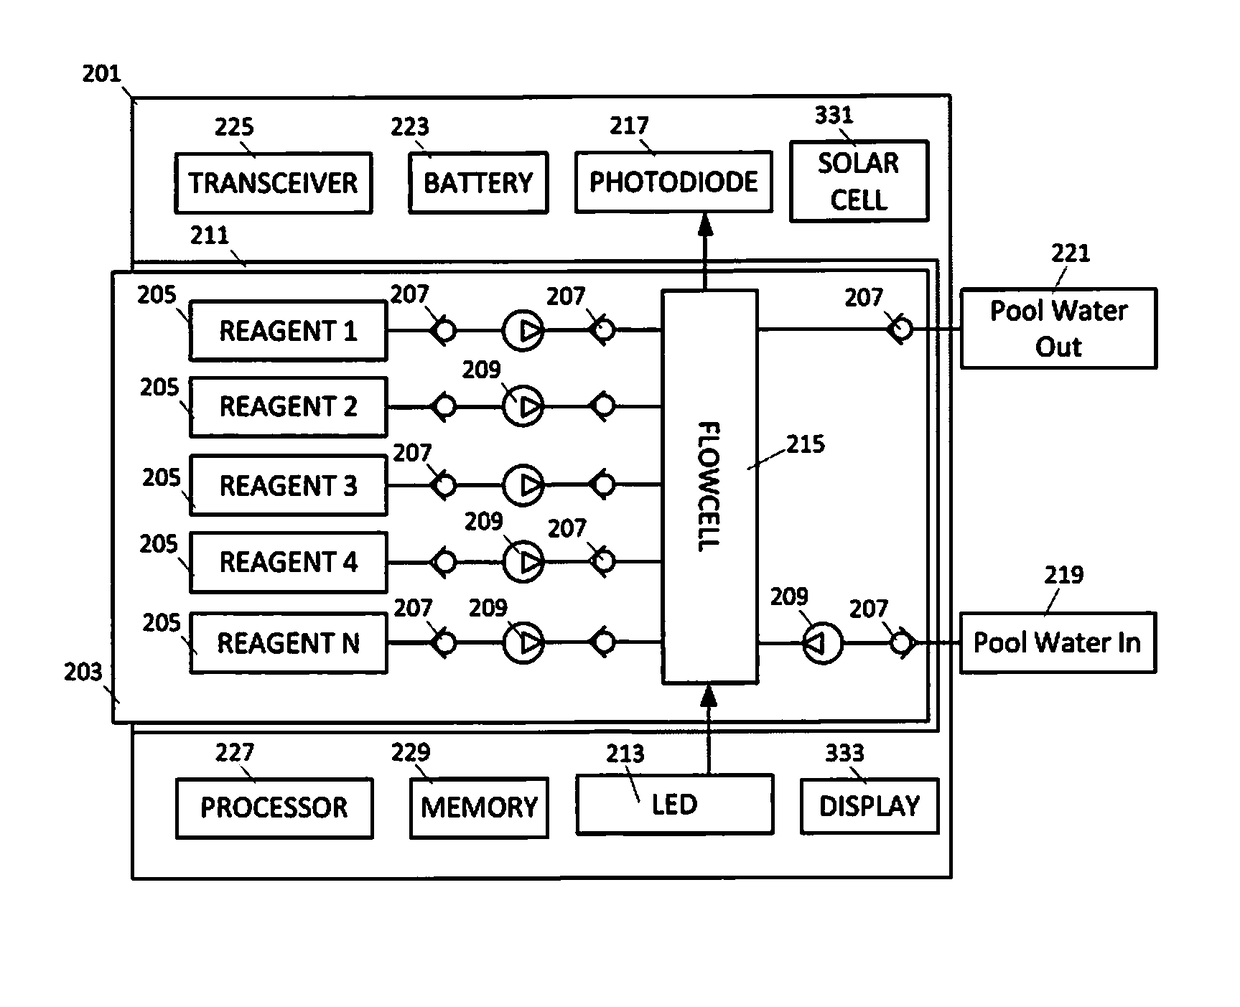 Water monitoring device and method